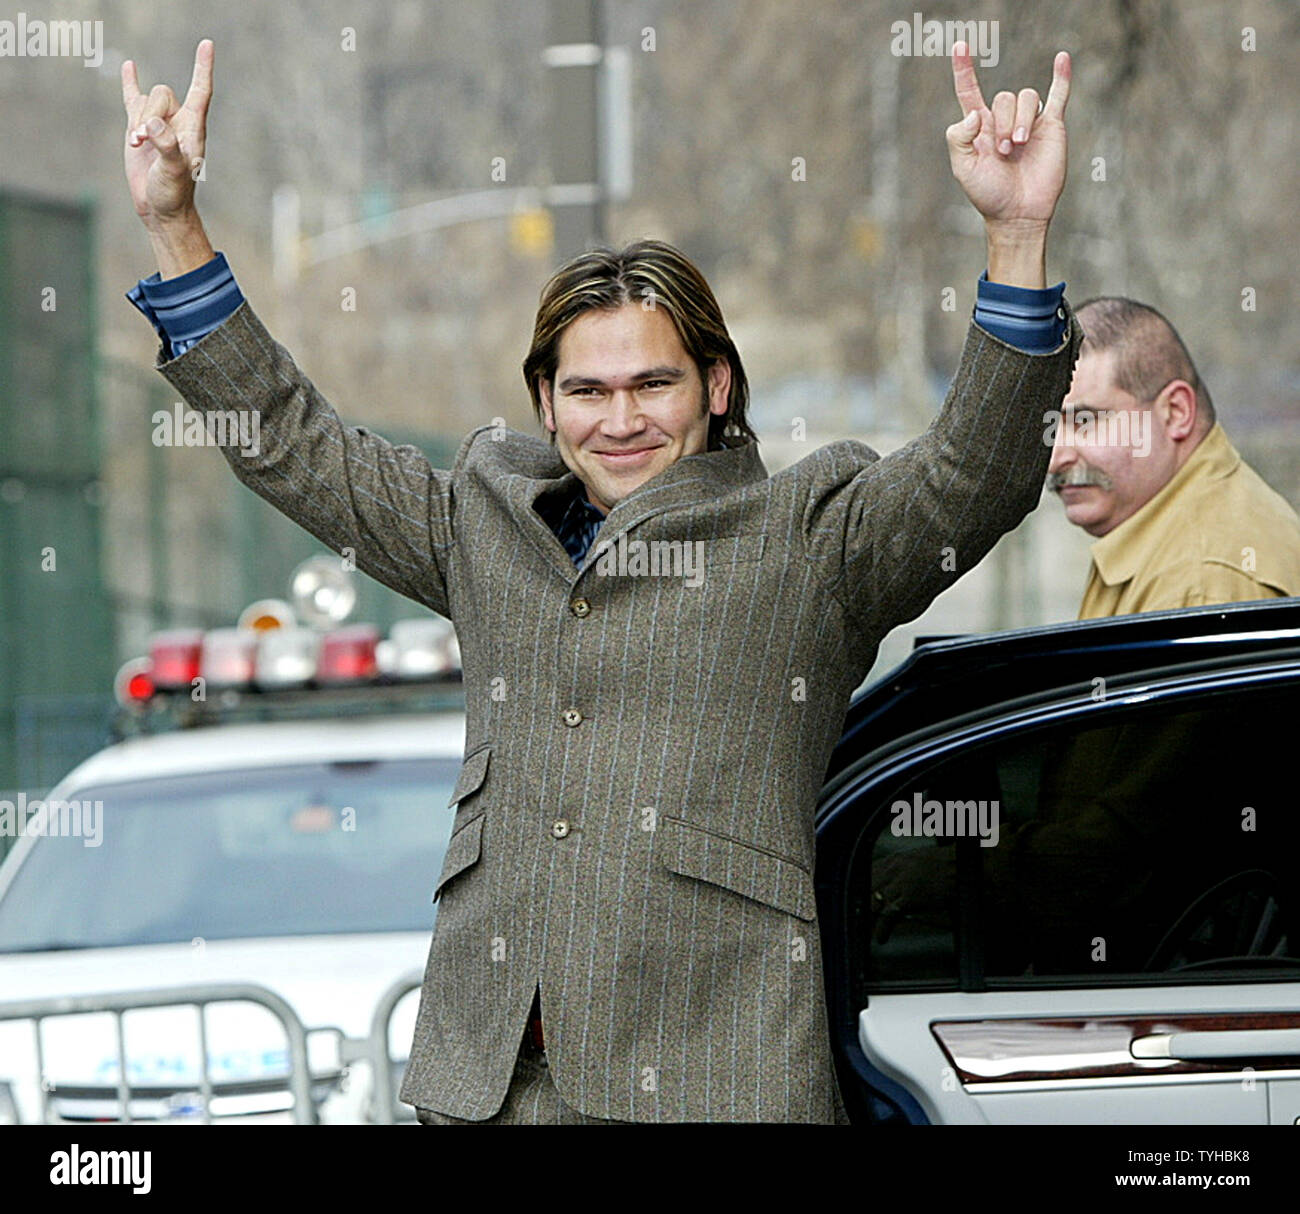 Johnny Damon, with his new, short hair cut, gestures to fans before  attending a press conference where he is introduced as the newest member of  the New York Yankees team at Yankee